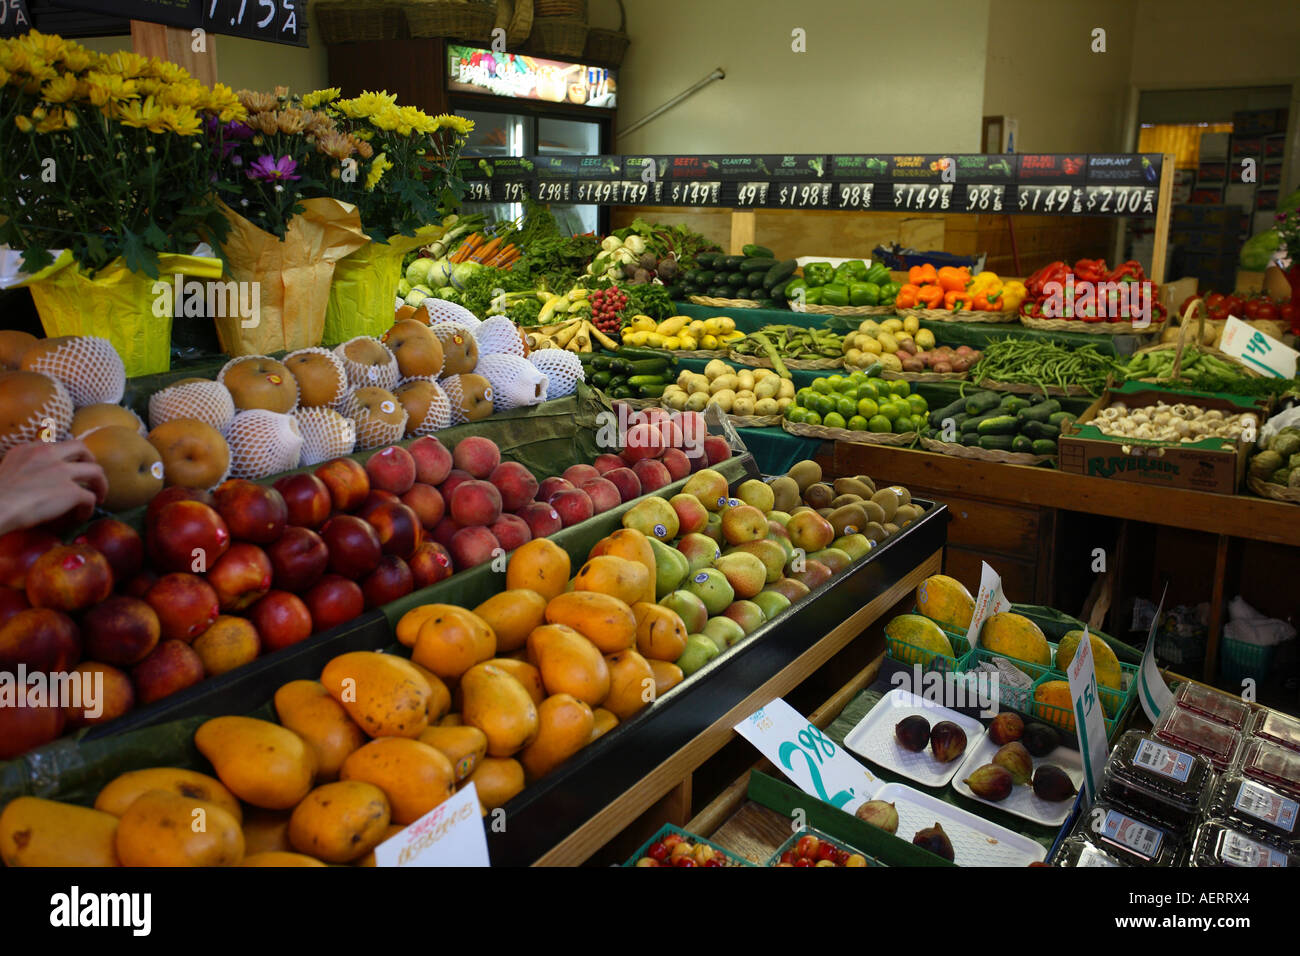 Fruit for sale at the Farmers market downtown Los Angeles, United States of America Stock Photo